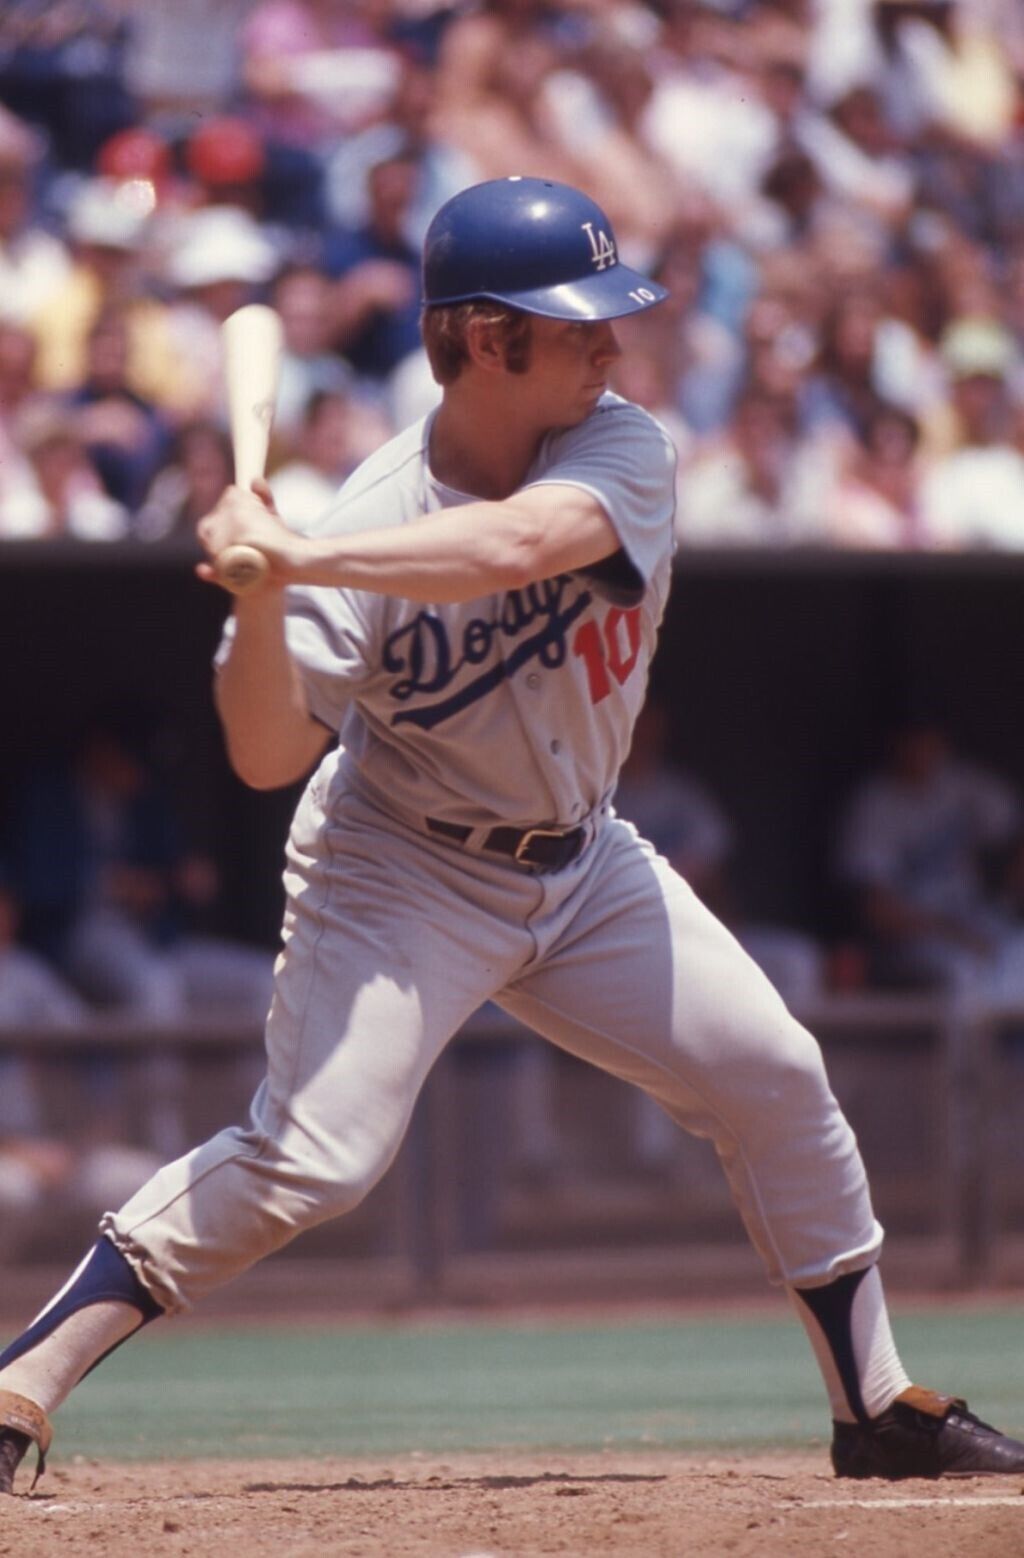 CB1-190 1973 RON CEY LOS ANGELES DODGERS STAR ORIG CLIFTON BOUTELLE 35MM SLIDE